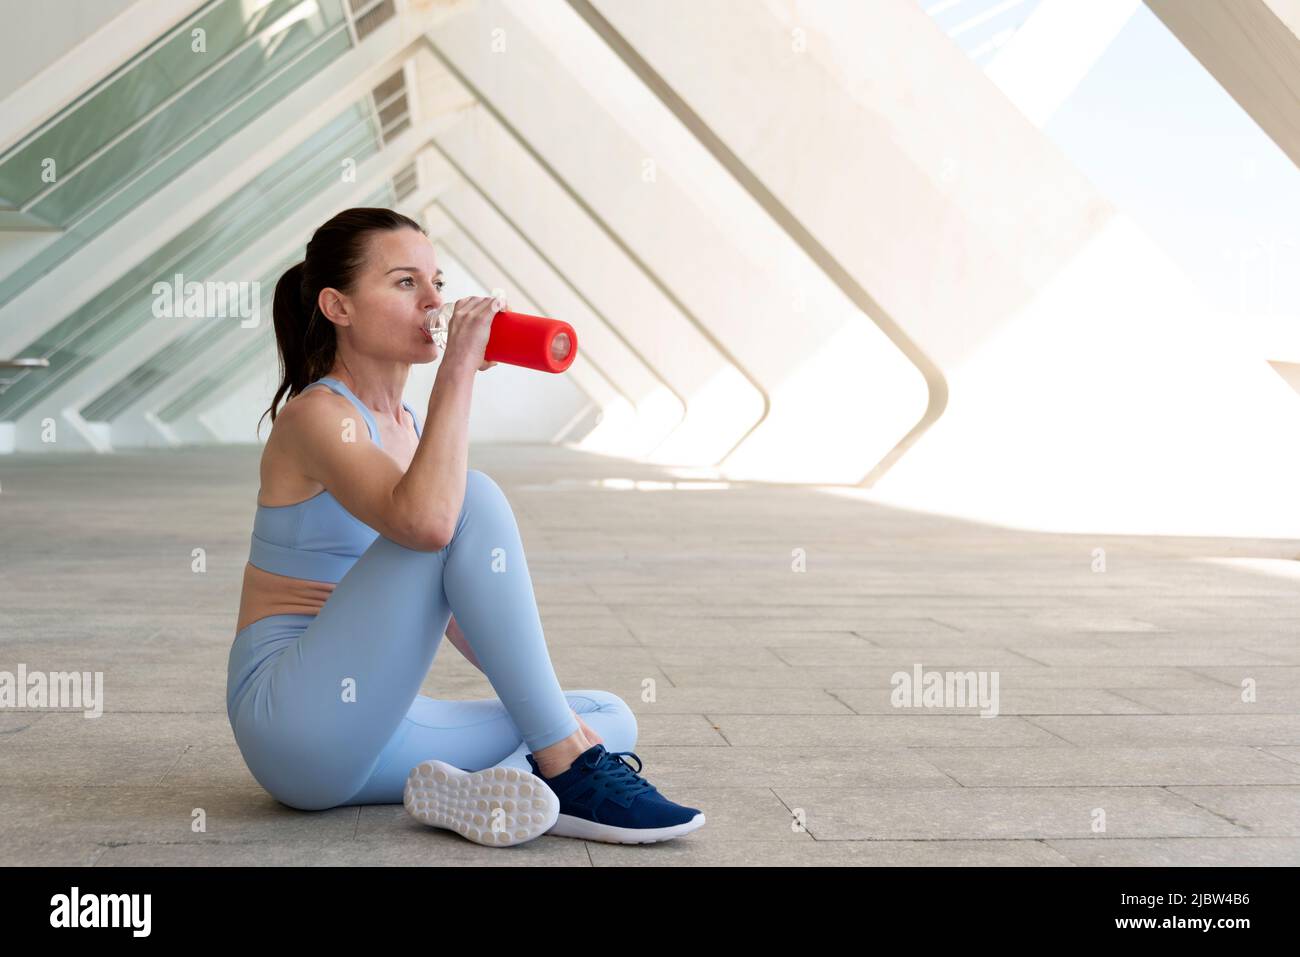 Fit, sporty woman sitting drinking water from a glass bottle after exercise or running. Urban background. Stock Photo